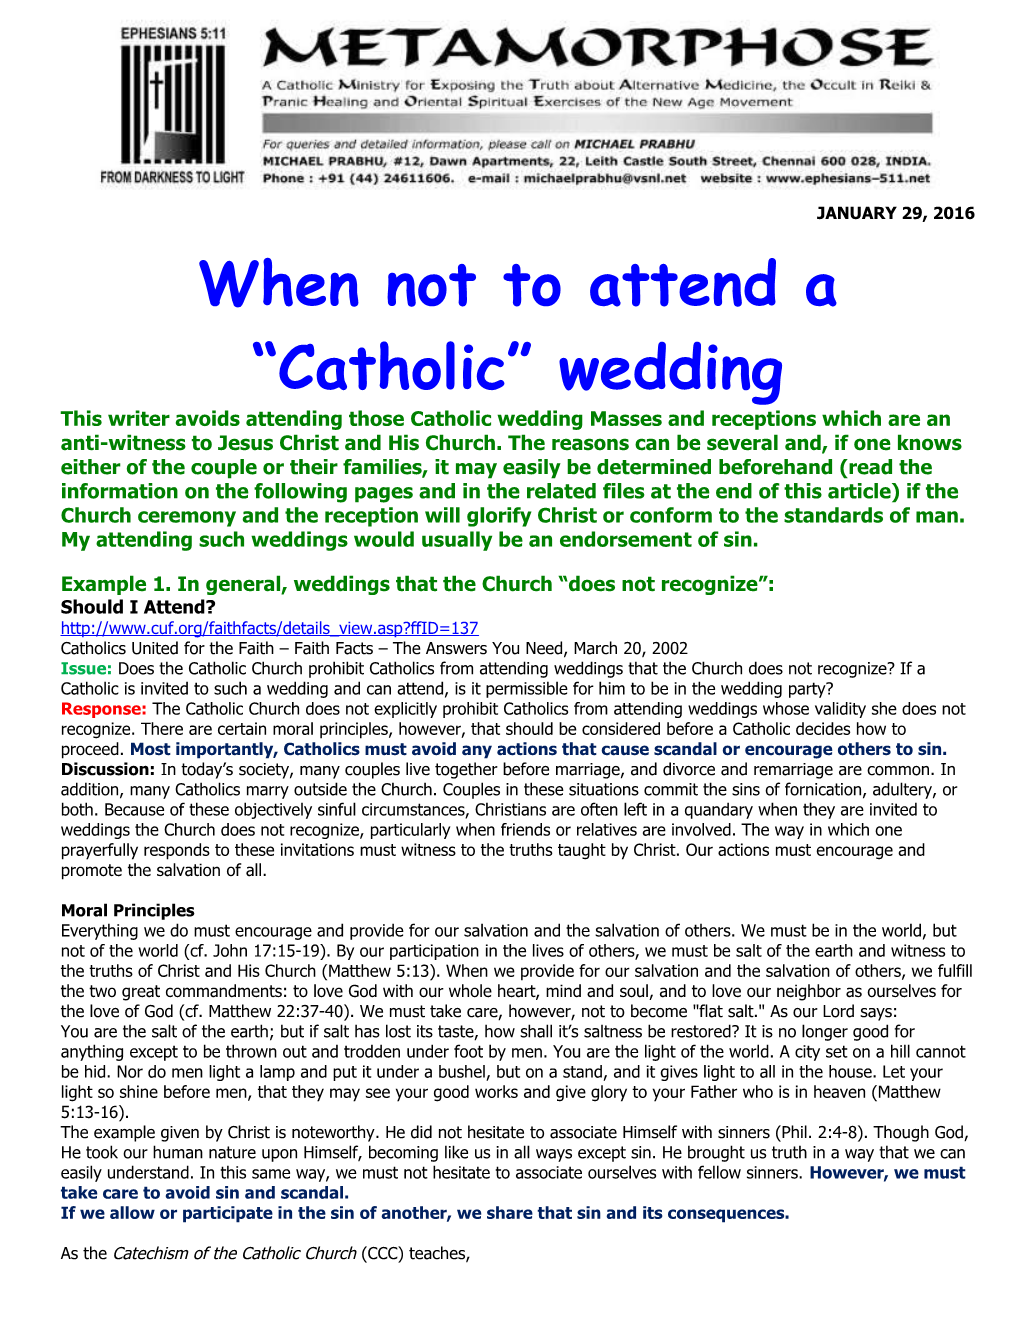 When Not to Attend a Catholic Wedding